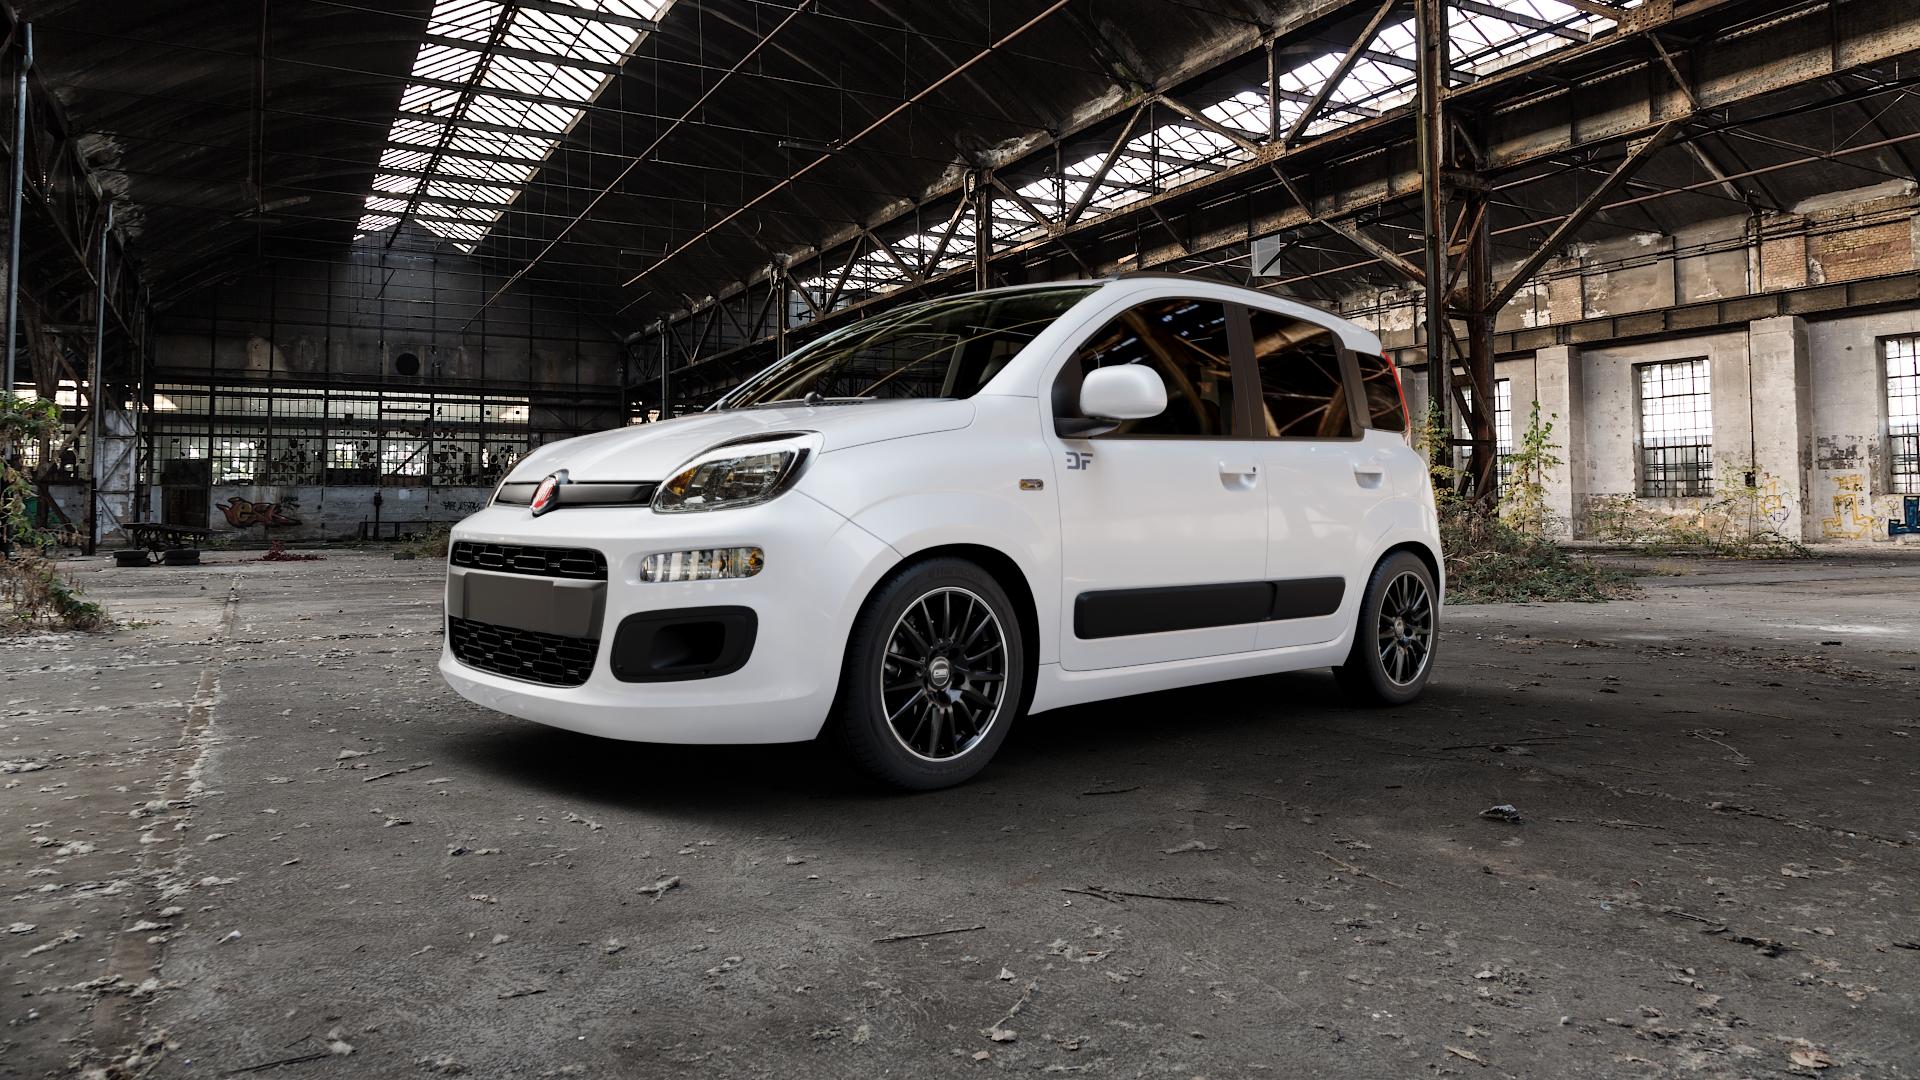 Fiat Panda Type 312 1,2l D Multijet 55kW (75 hp) Wheels and Tyre Packages |  velonity.com